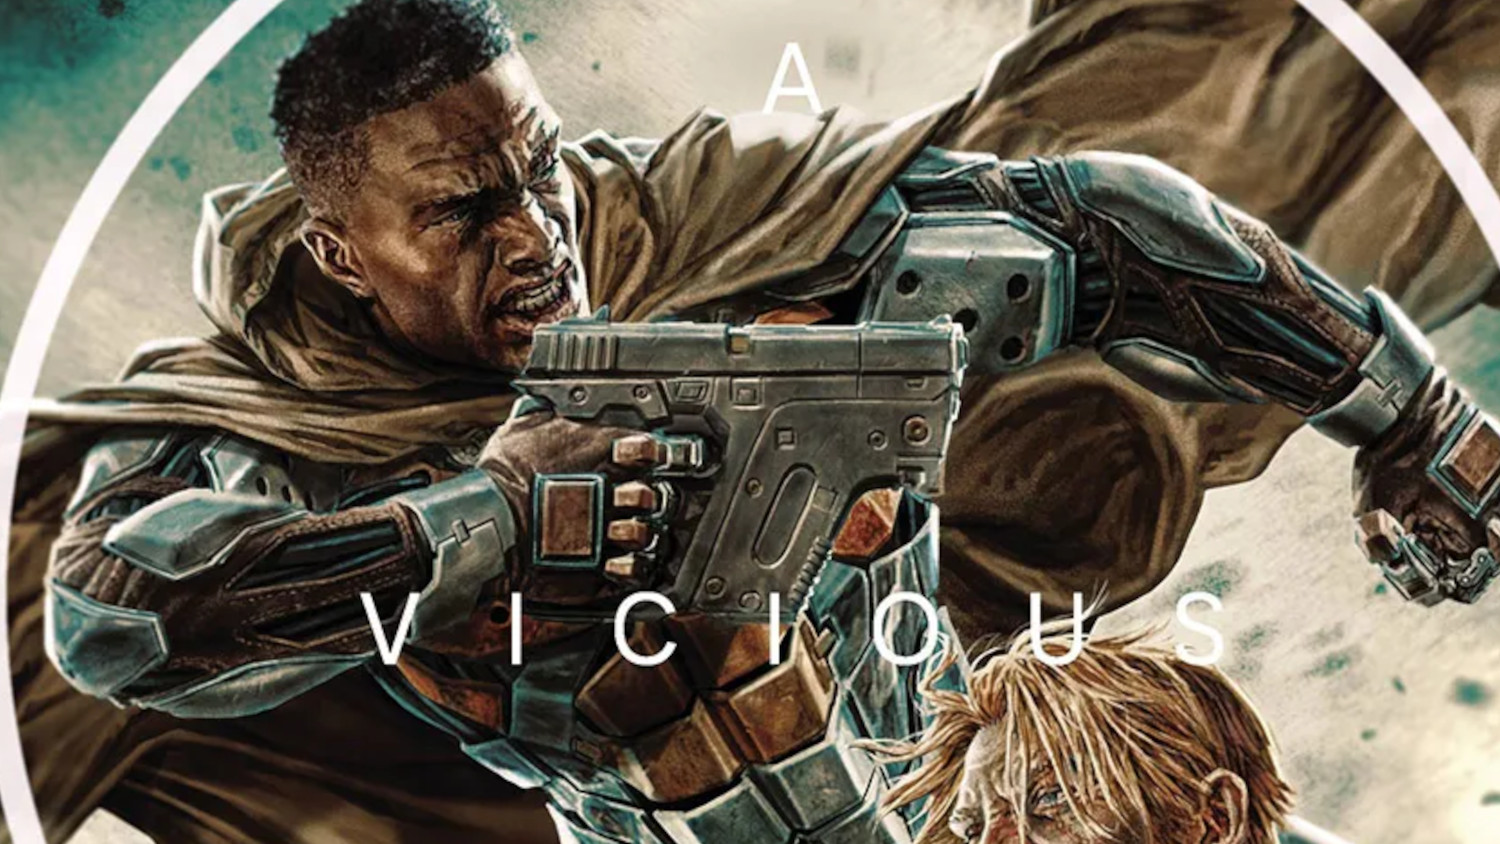 Ryan Coogler Heads To Universal For Comic Book Movie: ‘A Vicious Circle’